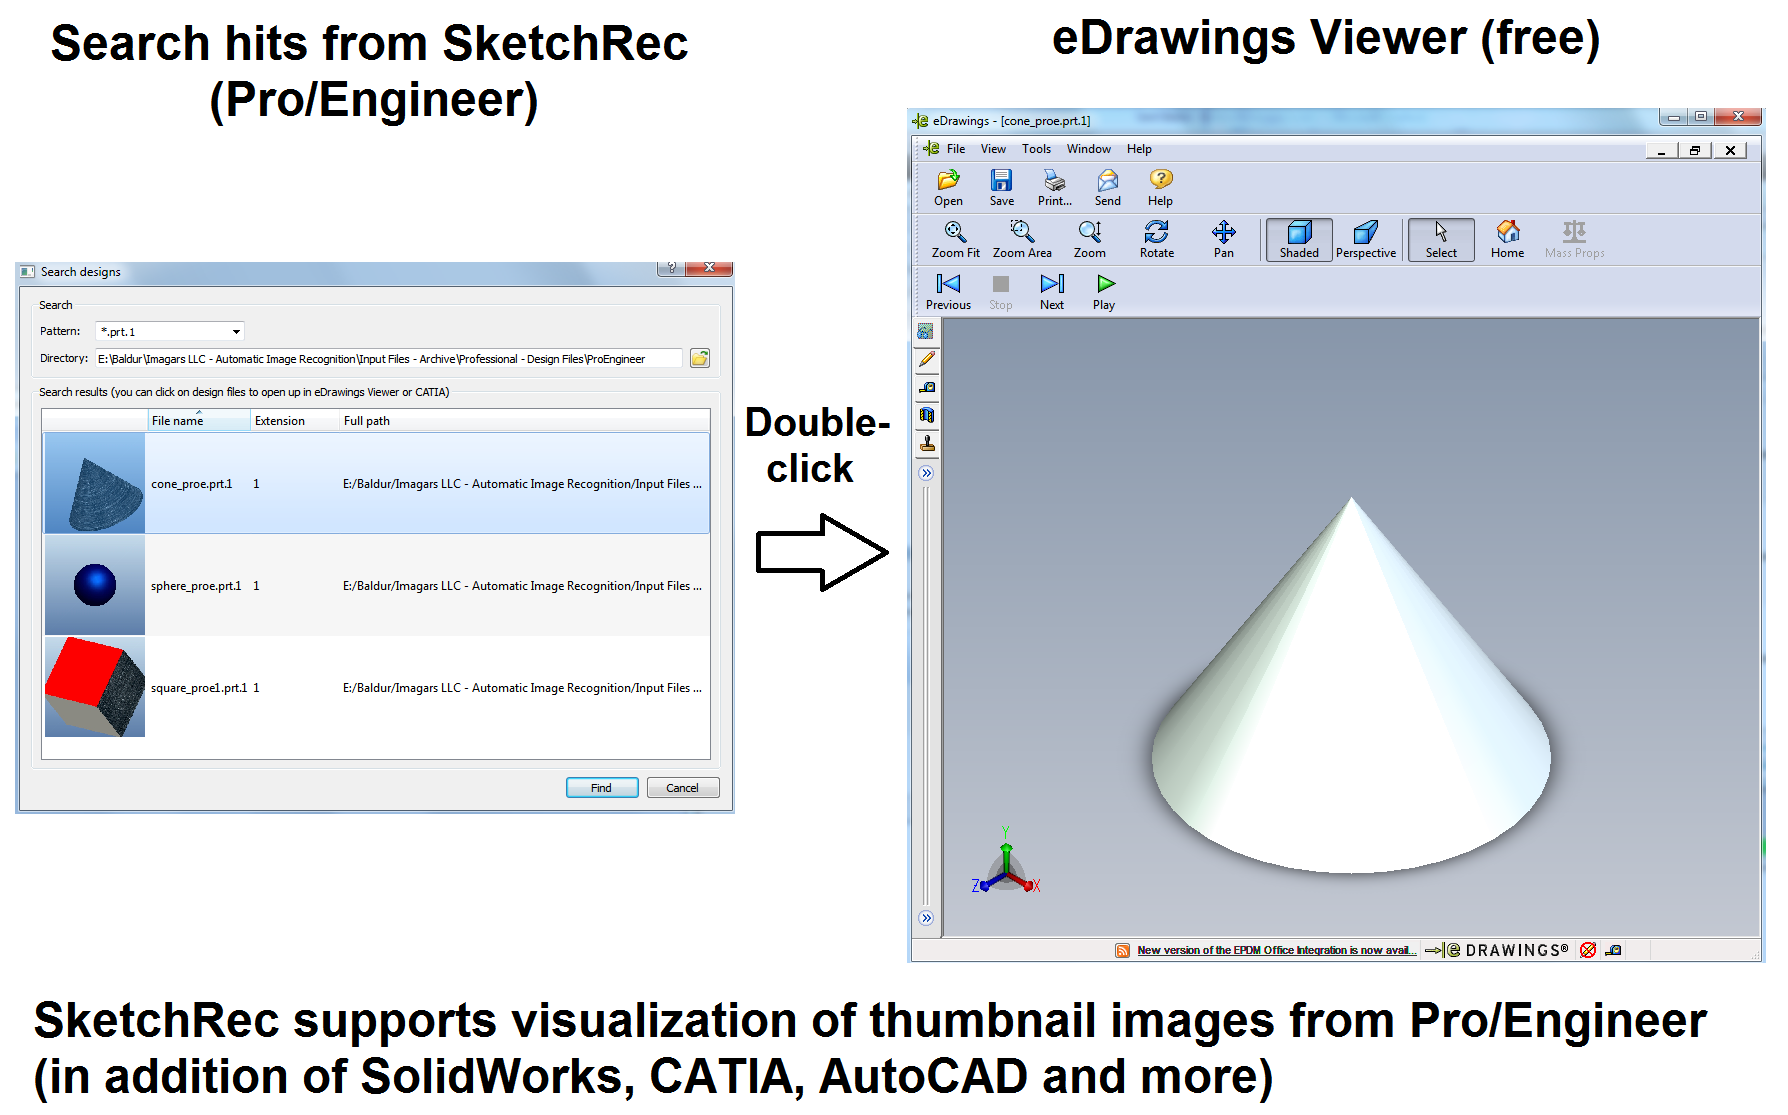 Search+Hits+for+ProEngineer+Visualized+in+eDrawings+Viewer.png